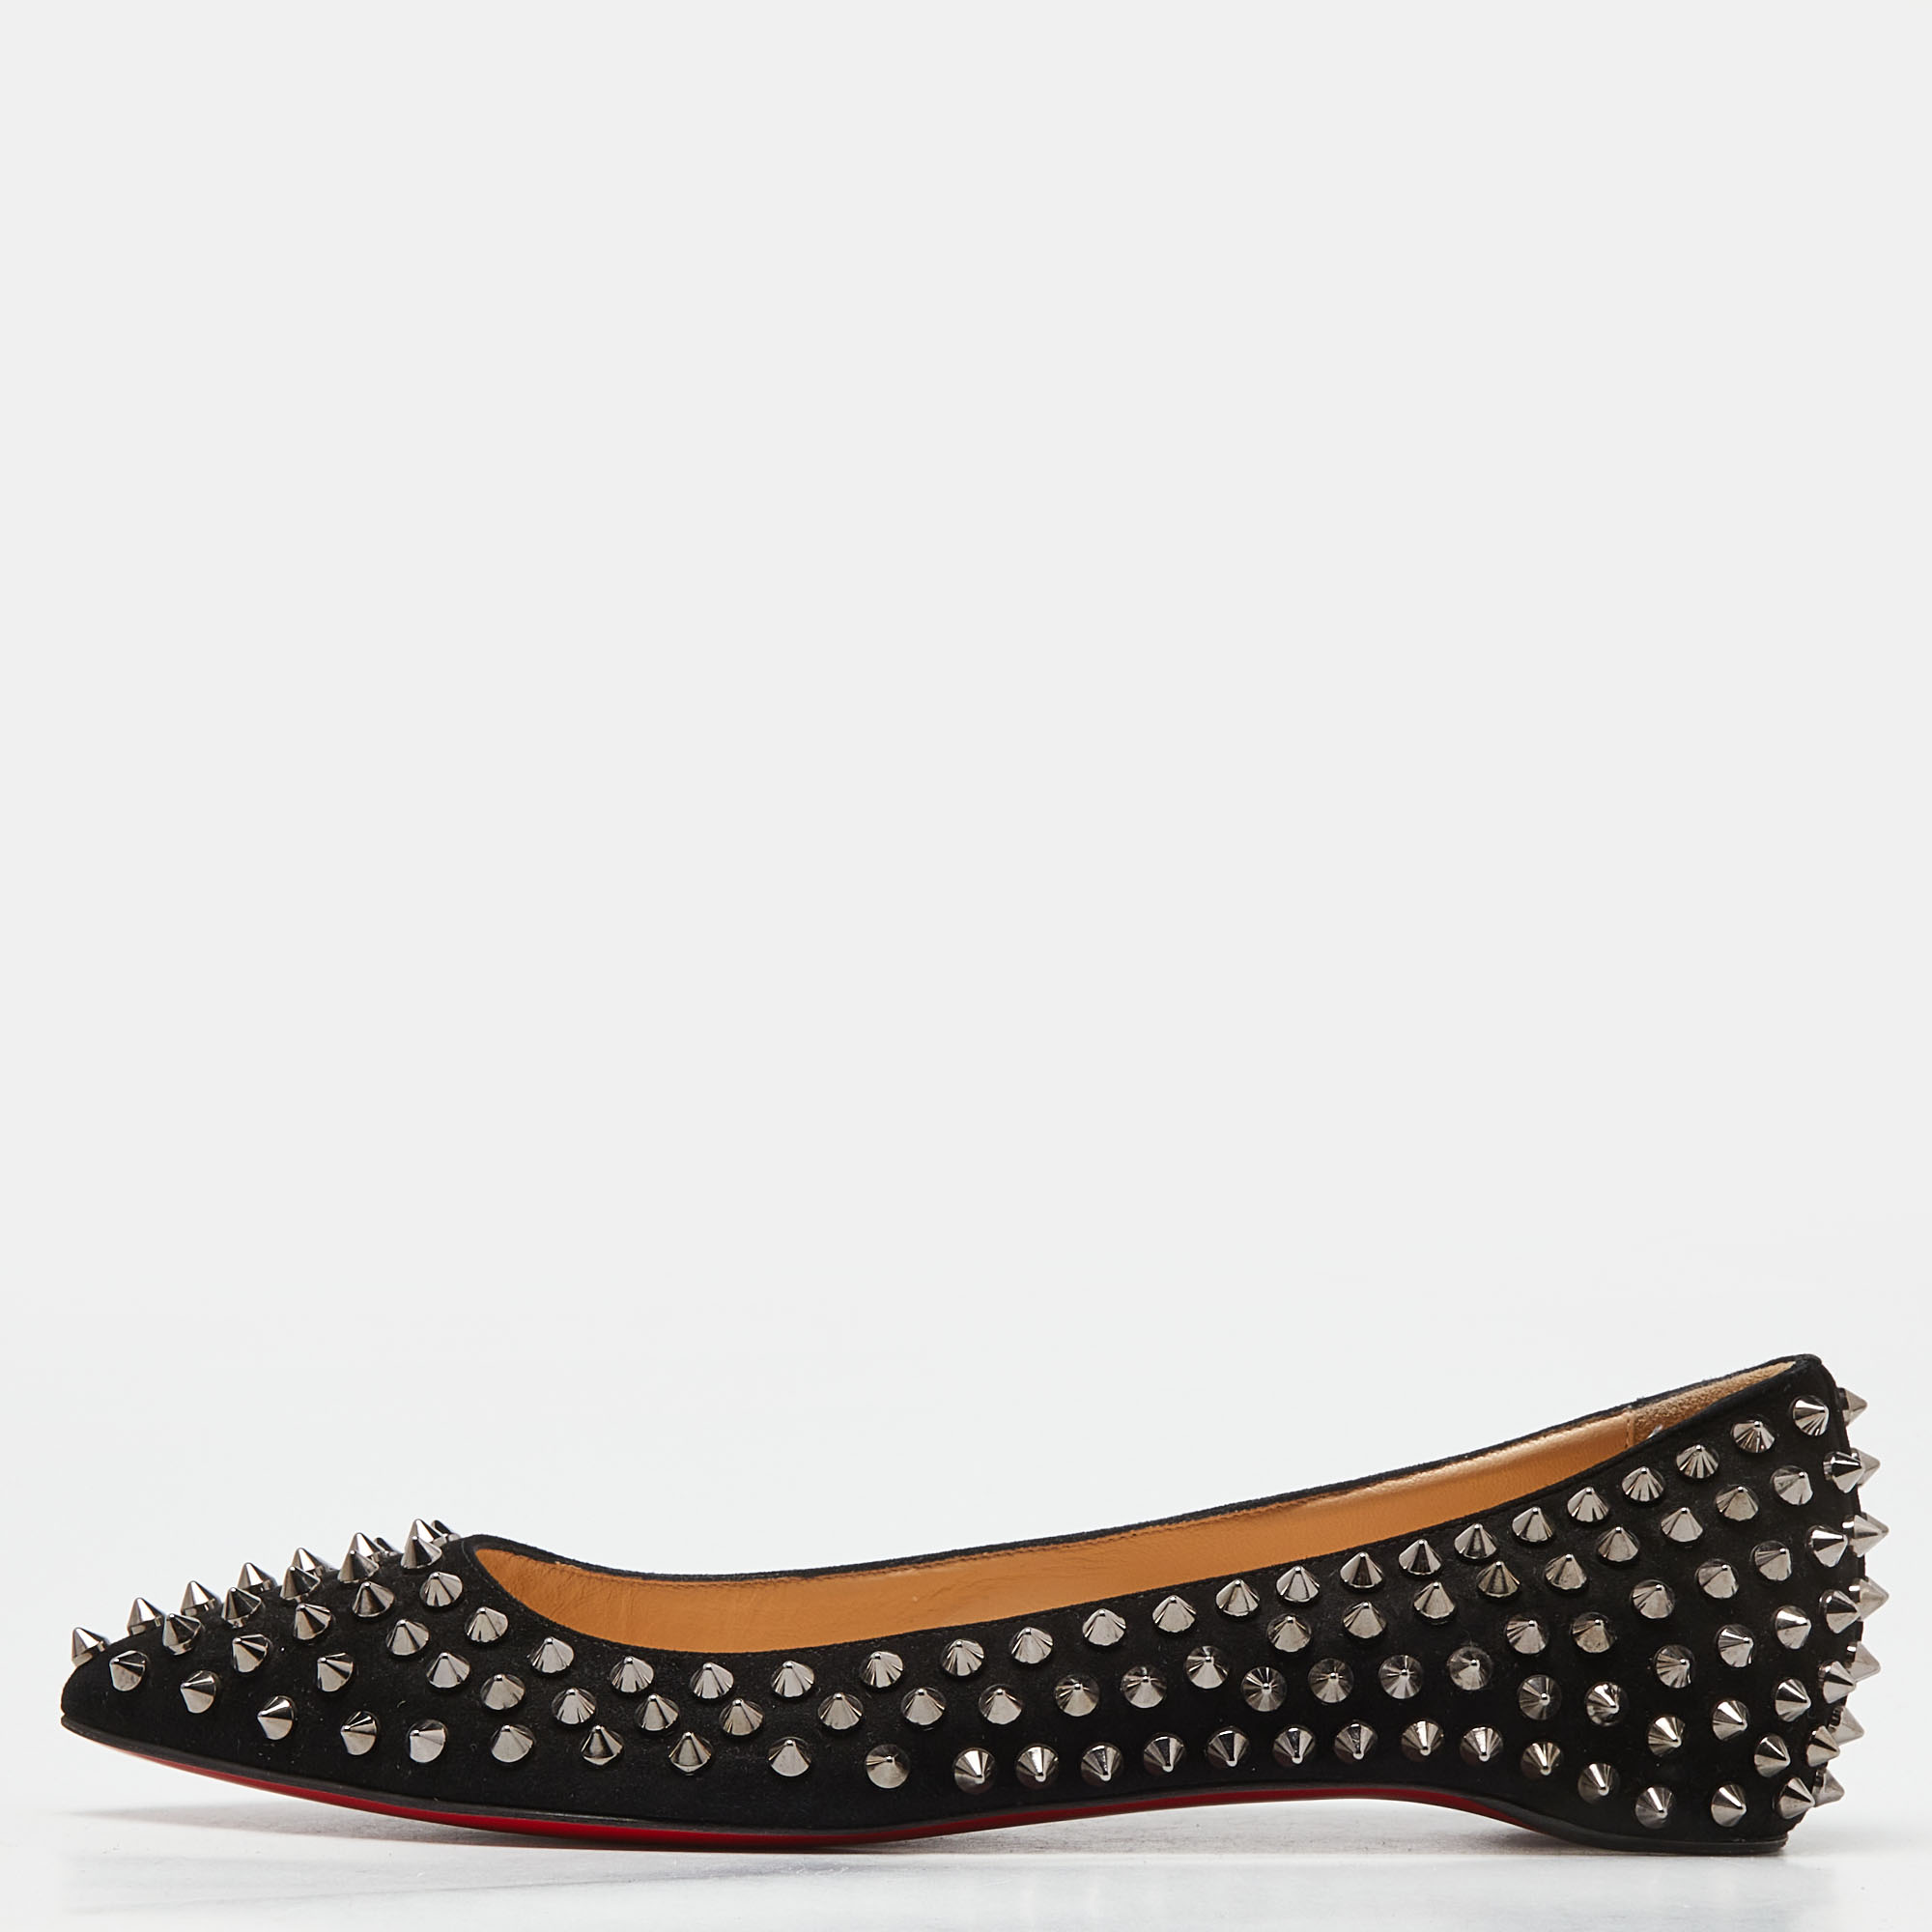 Pre-owned Christian Louboutin Black Suede Pigalle Spikes Ballet Flats Size 38